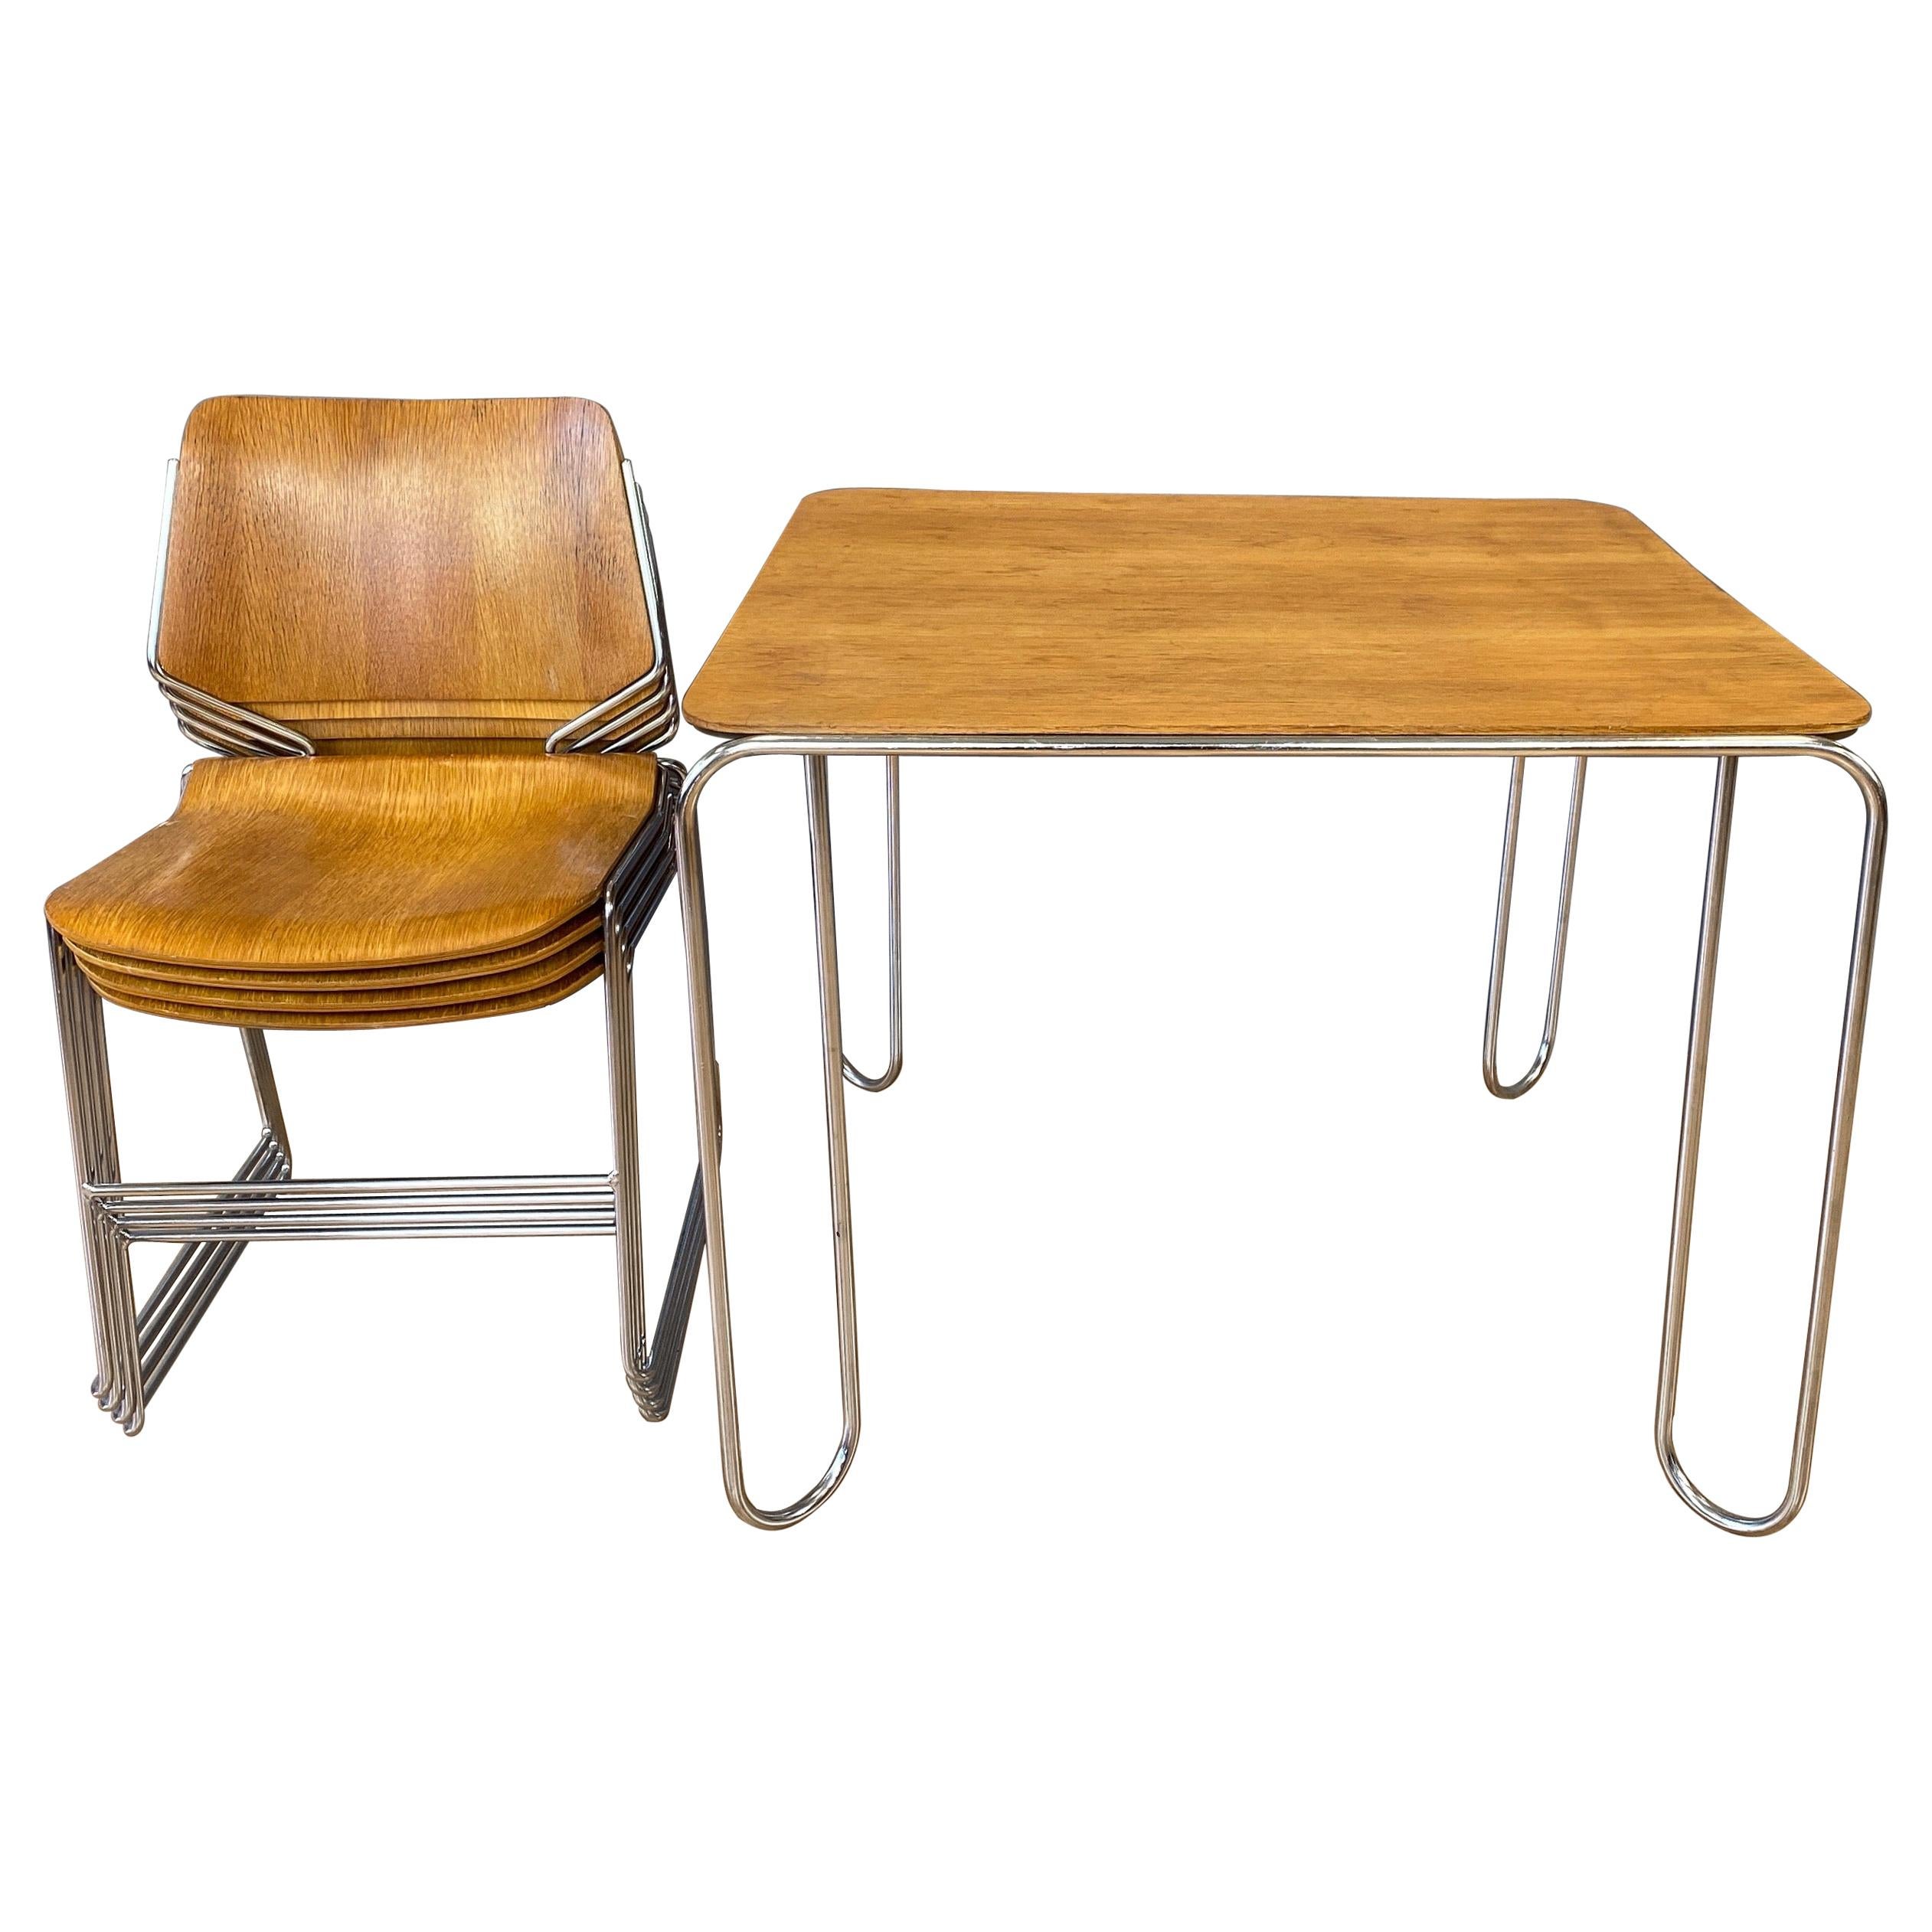 David Rowland Oak 40/4 Stacking Chairs and Unusual Table, Five-Piece Set